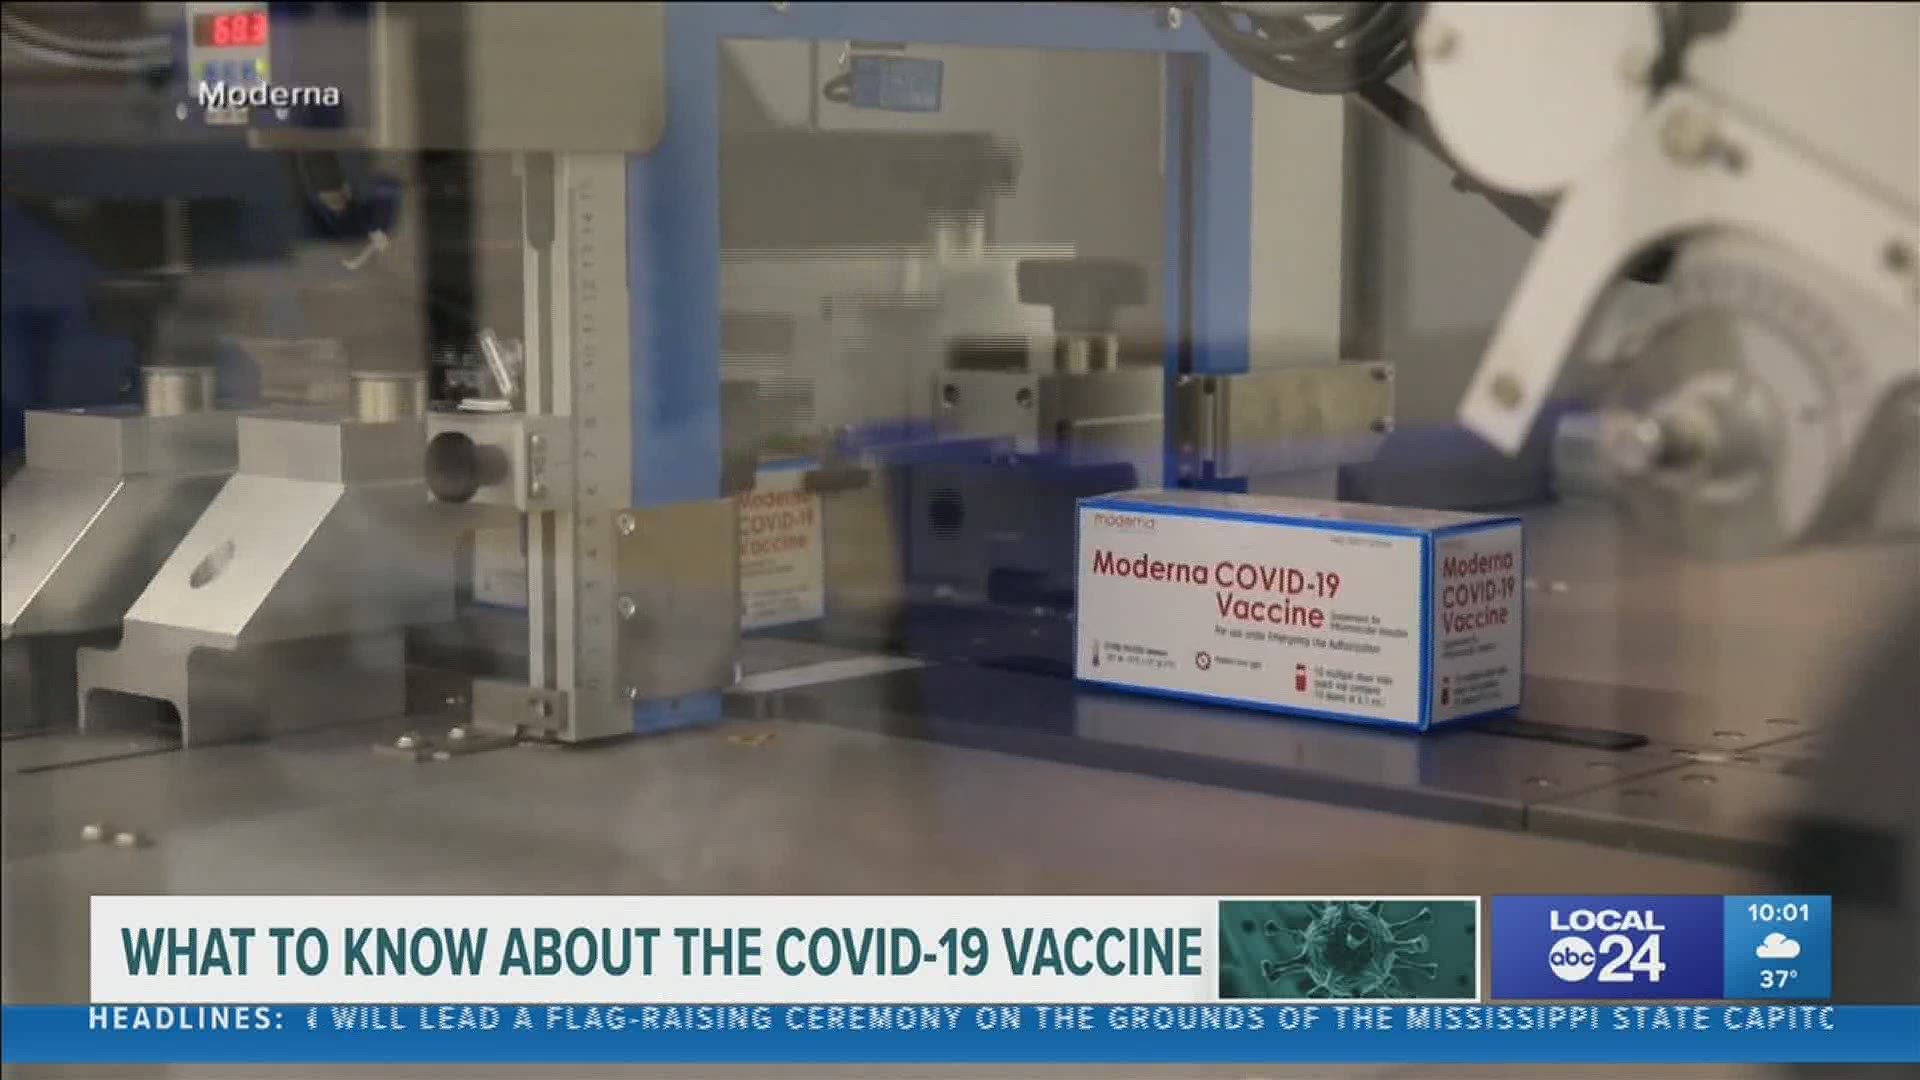 A local doctor explains what's in the COVID-19 vaccine and how it works.